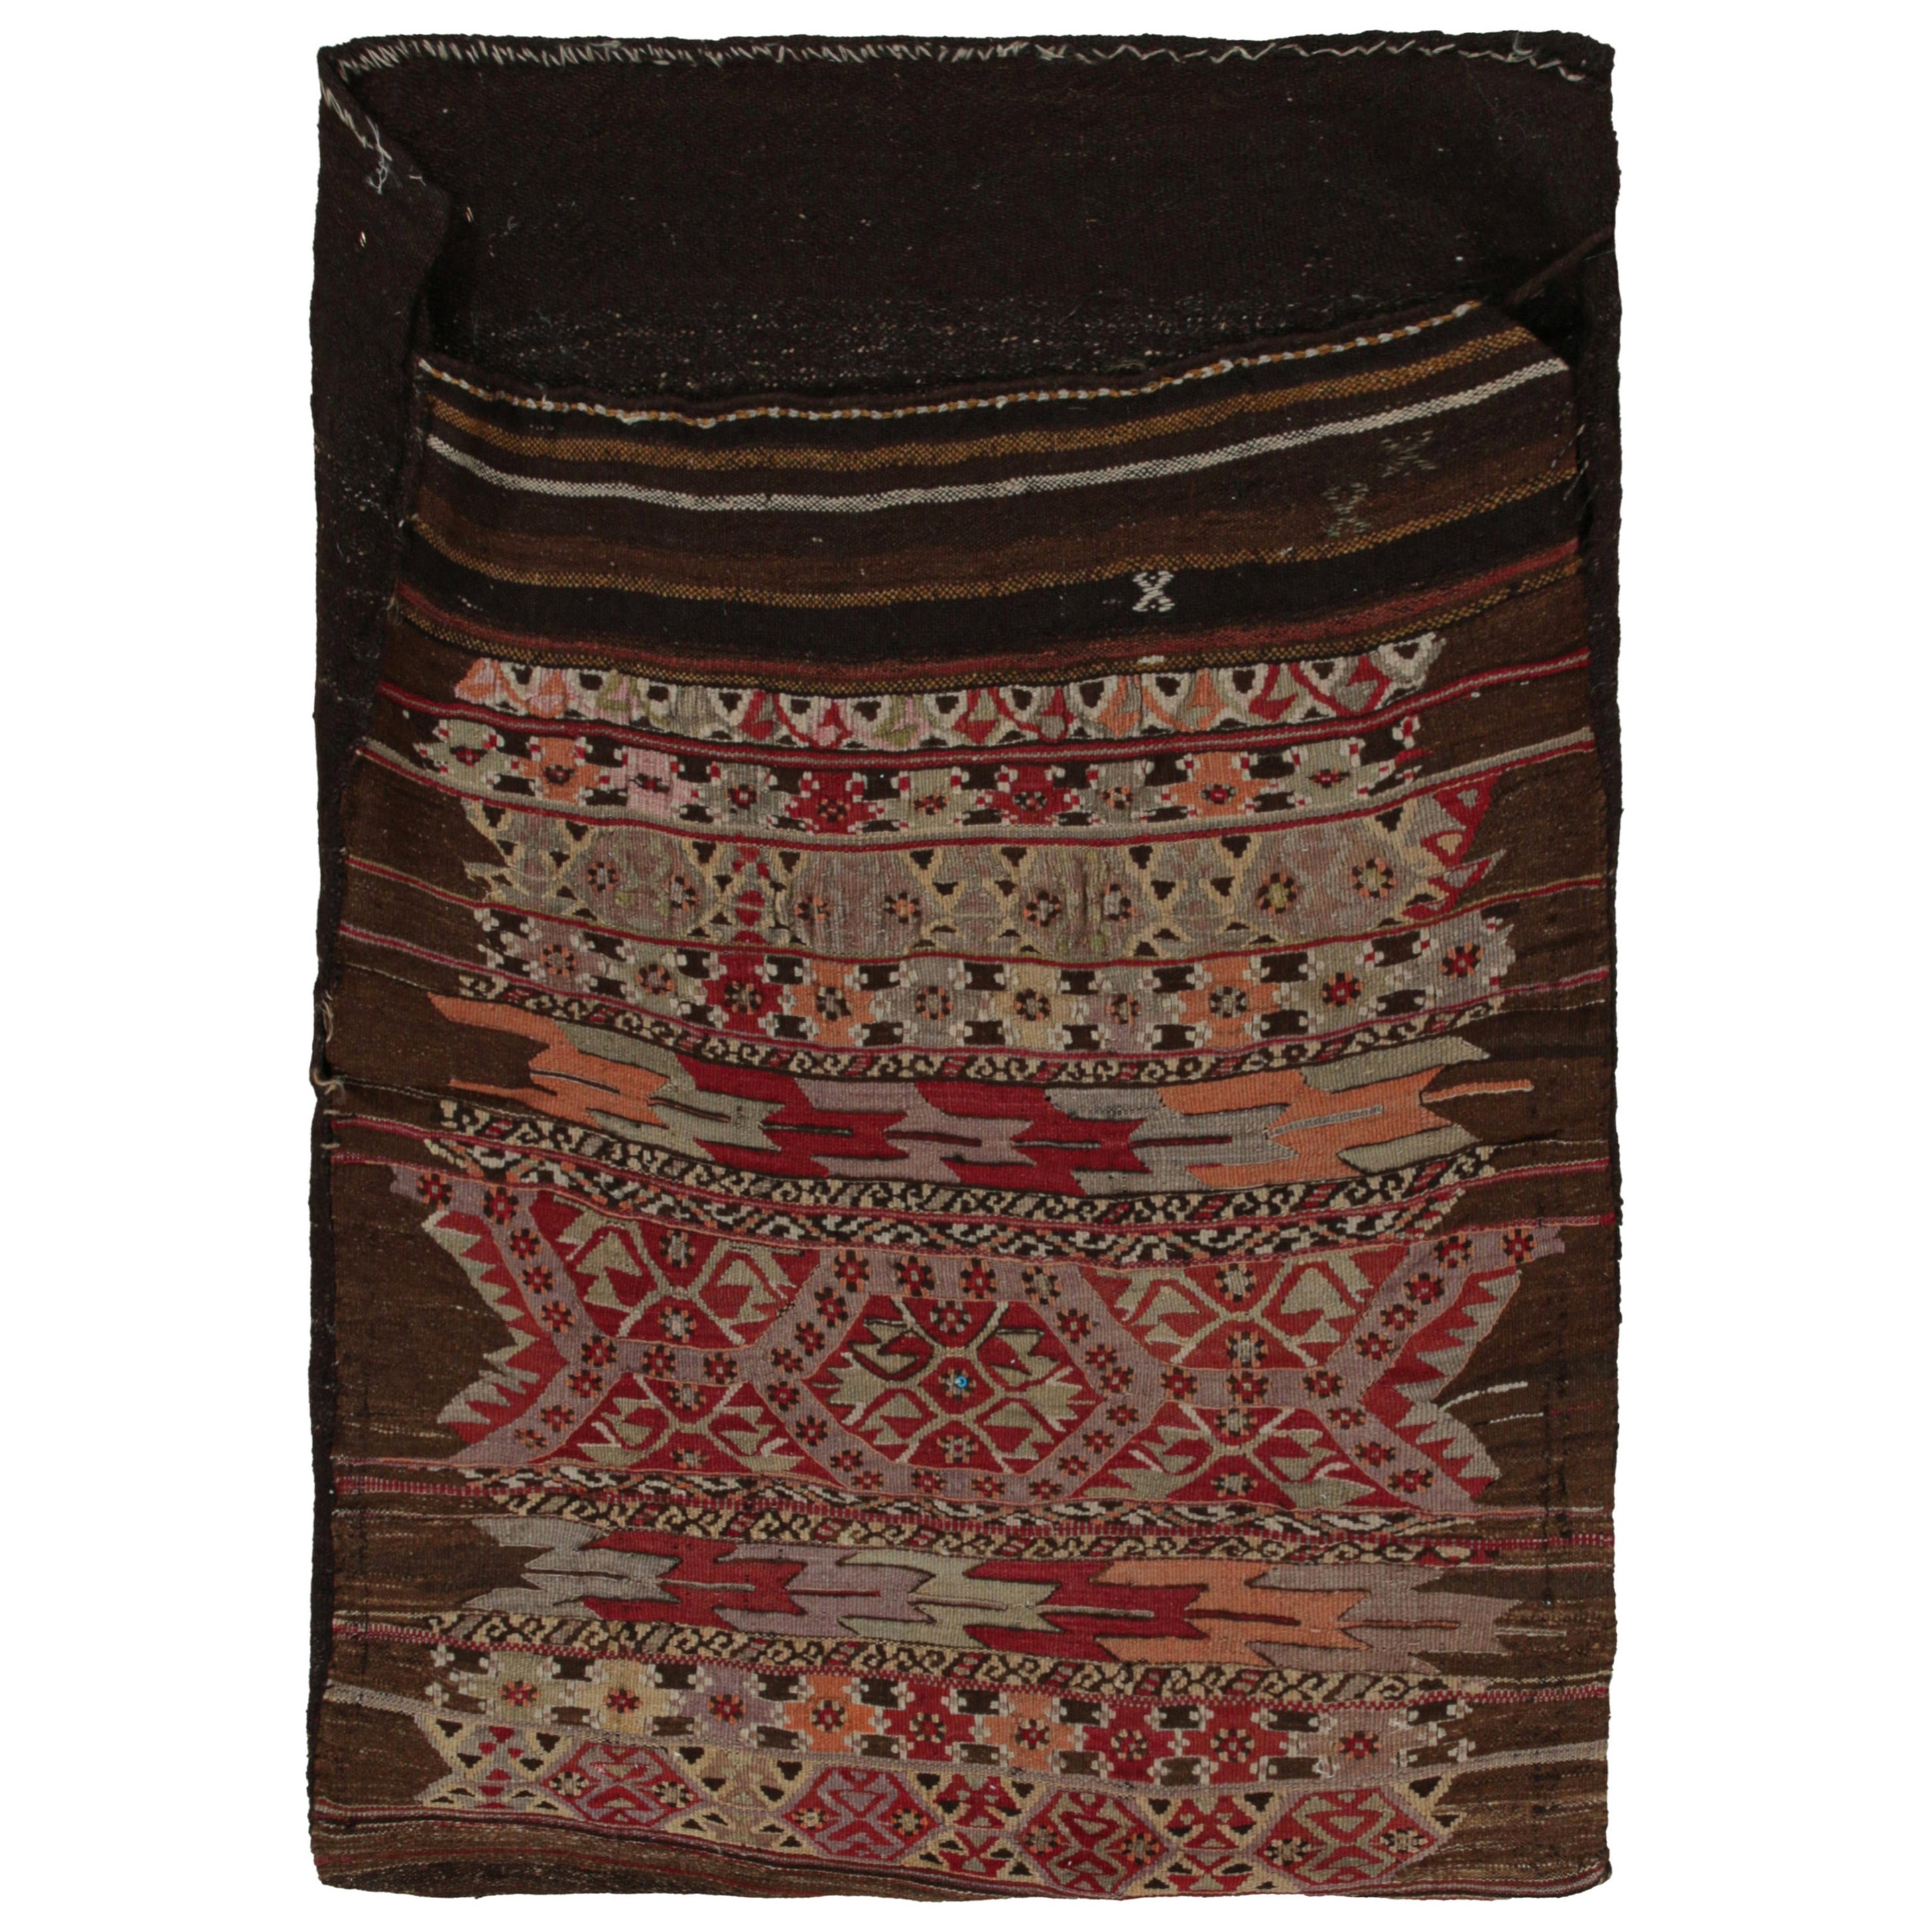 Antique Persian Bag Kilim in Brown with Geometric Patterns, from Rug & Kilim For Sale